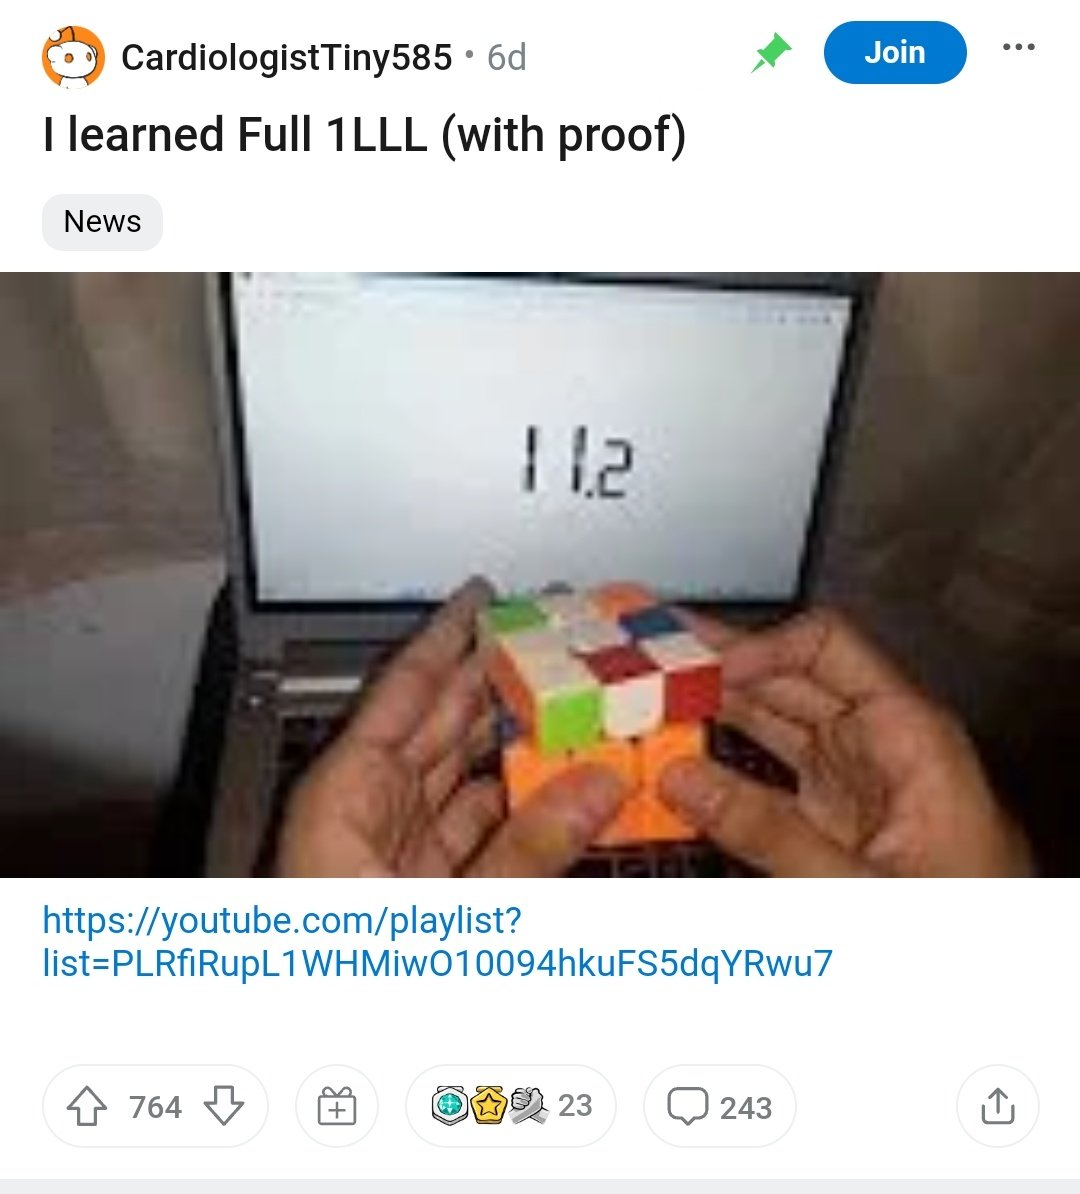 something absolutely insane just happened in the speedcubing (competitive rubik's cube solving) community and i had no idea about it. this kid just learned how to skip the entire last layer by learning 3915 algorithms for every possible case

what the fuck